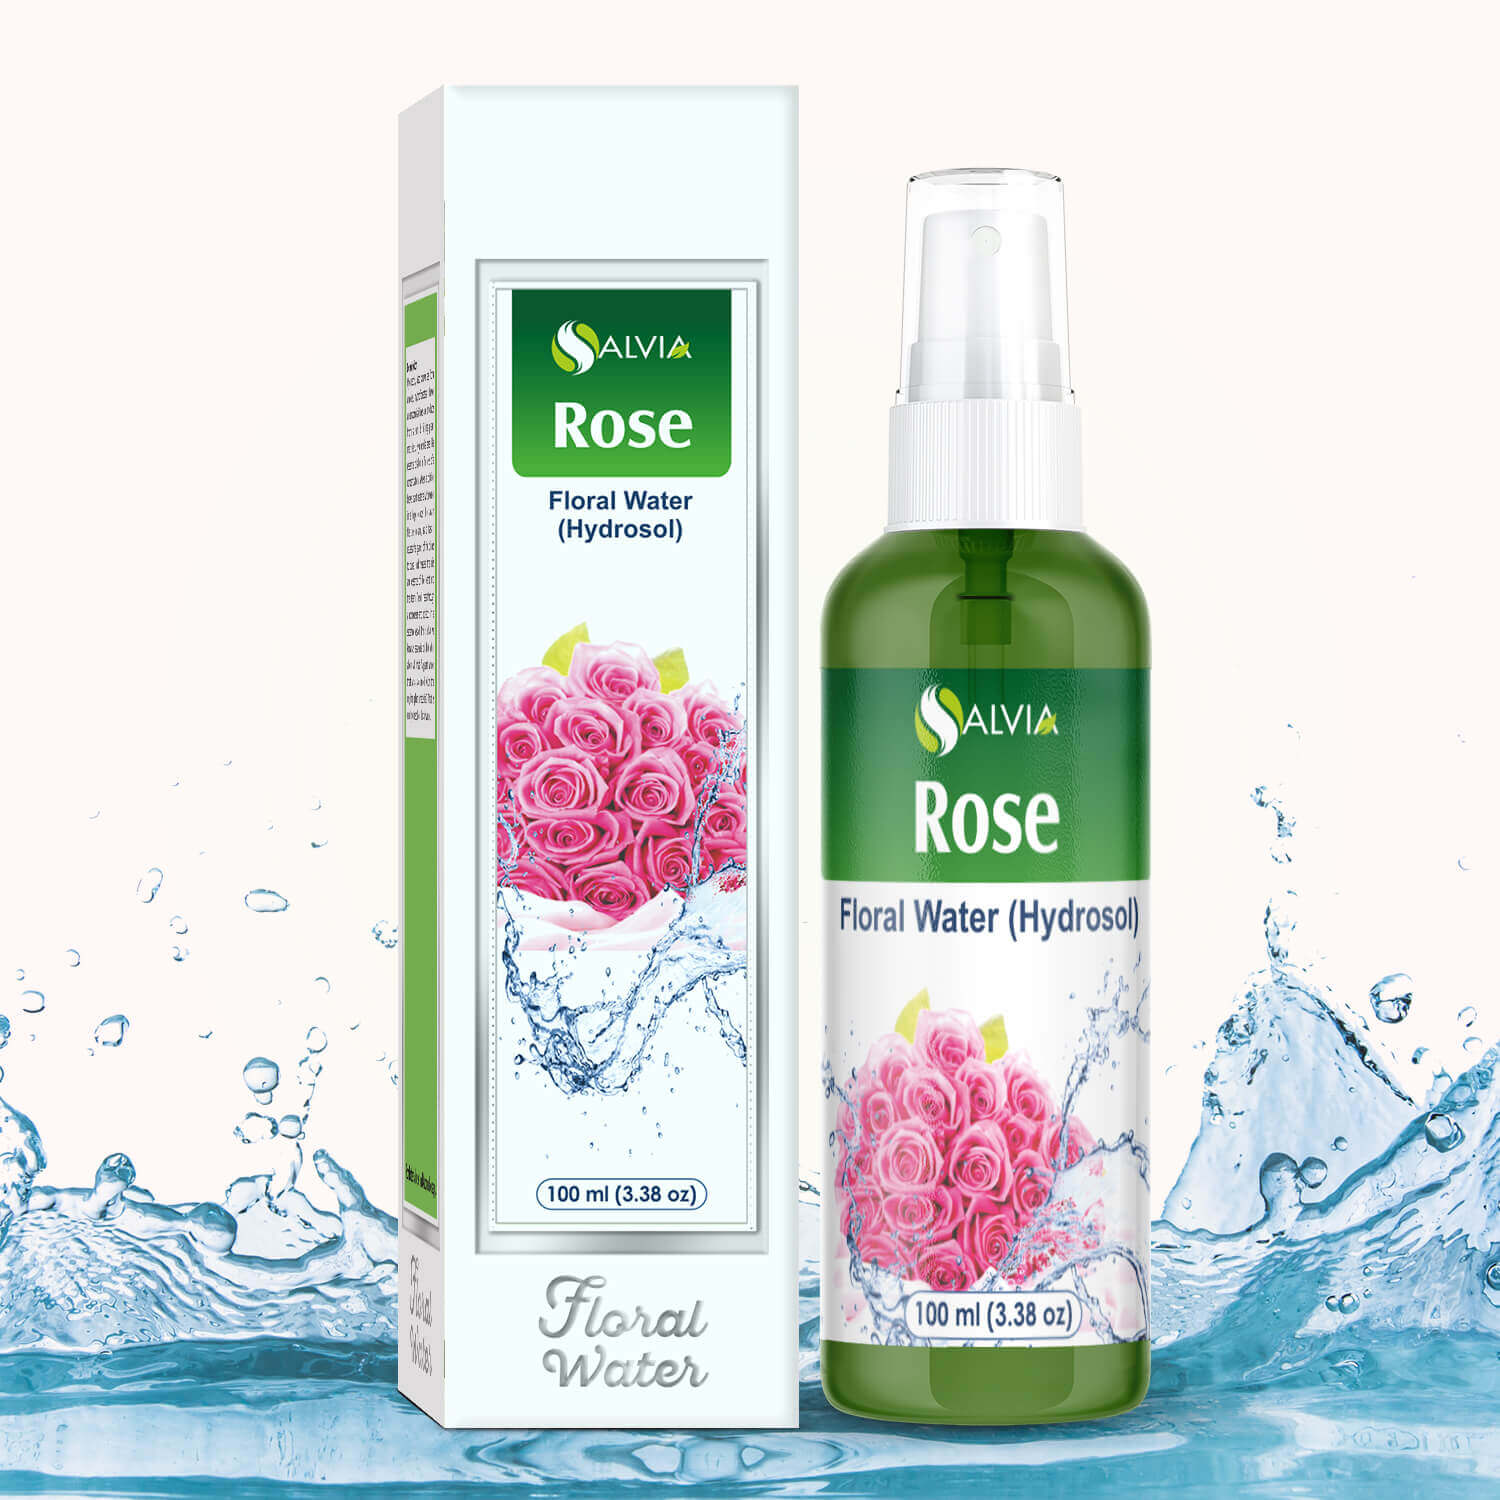 Salvia Floral Water 100 ml Rose Floral Water (Hydrosol) Pure And Natural